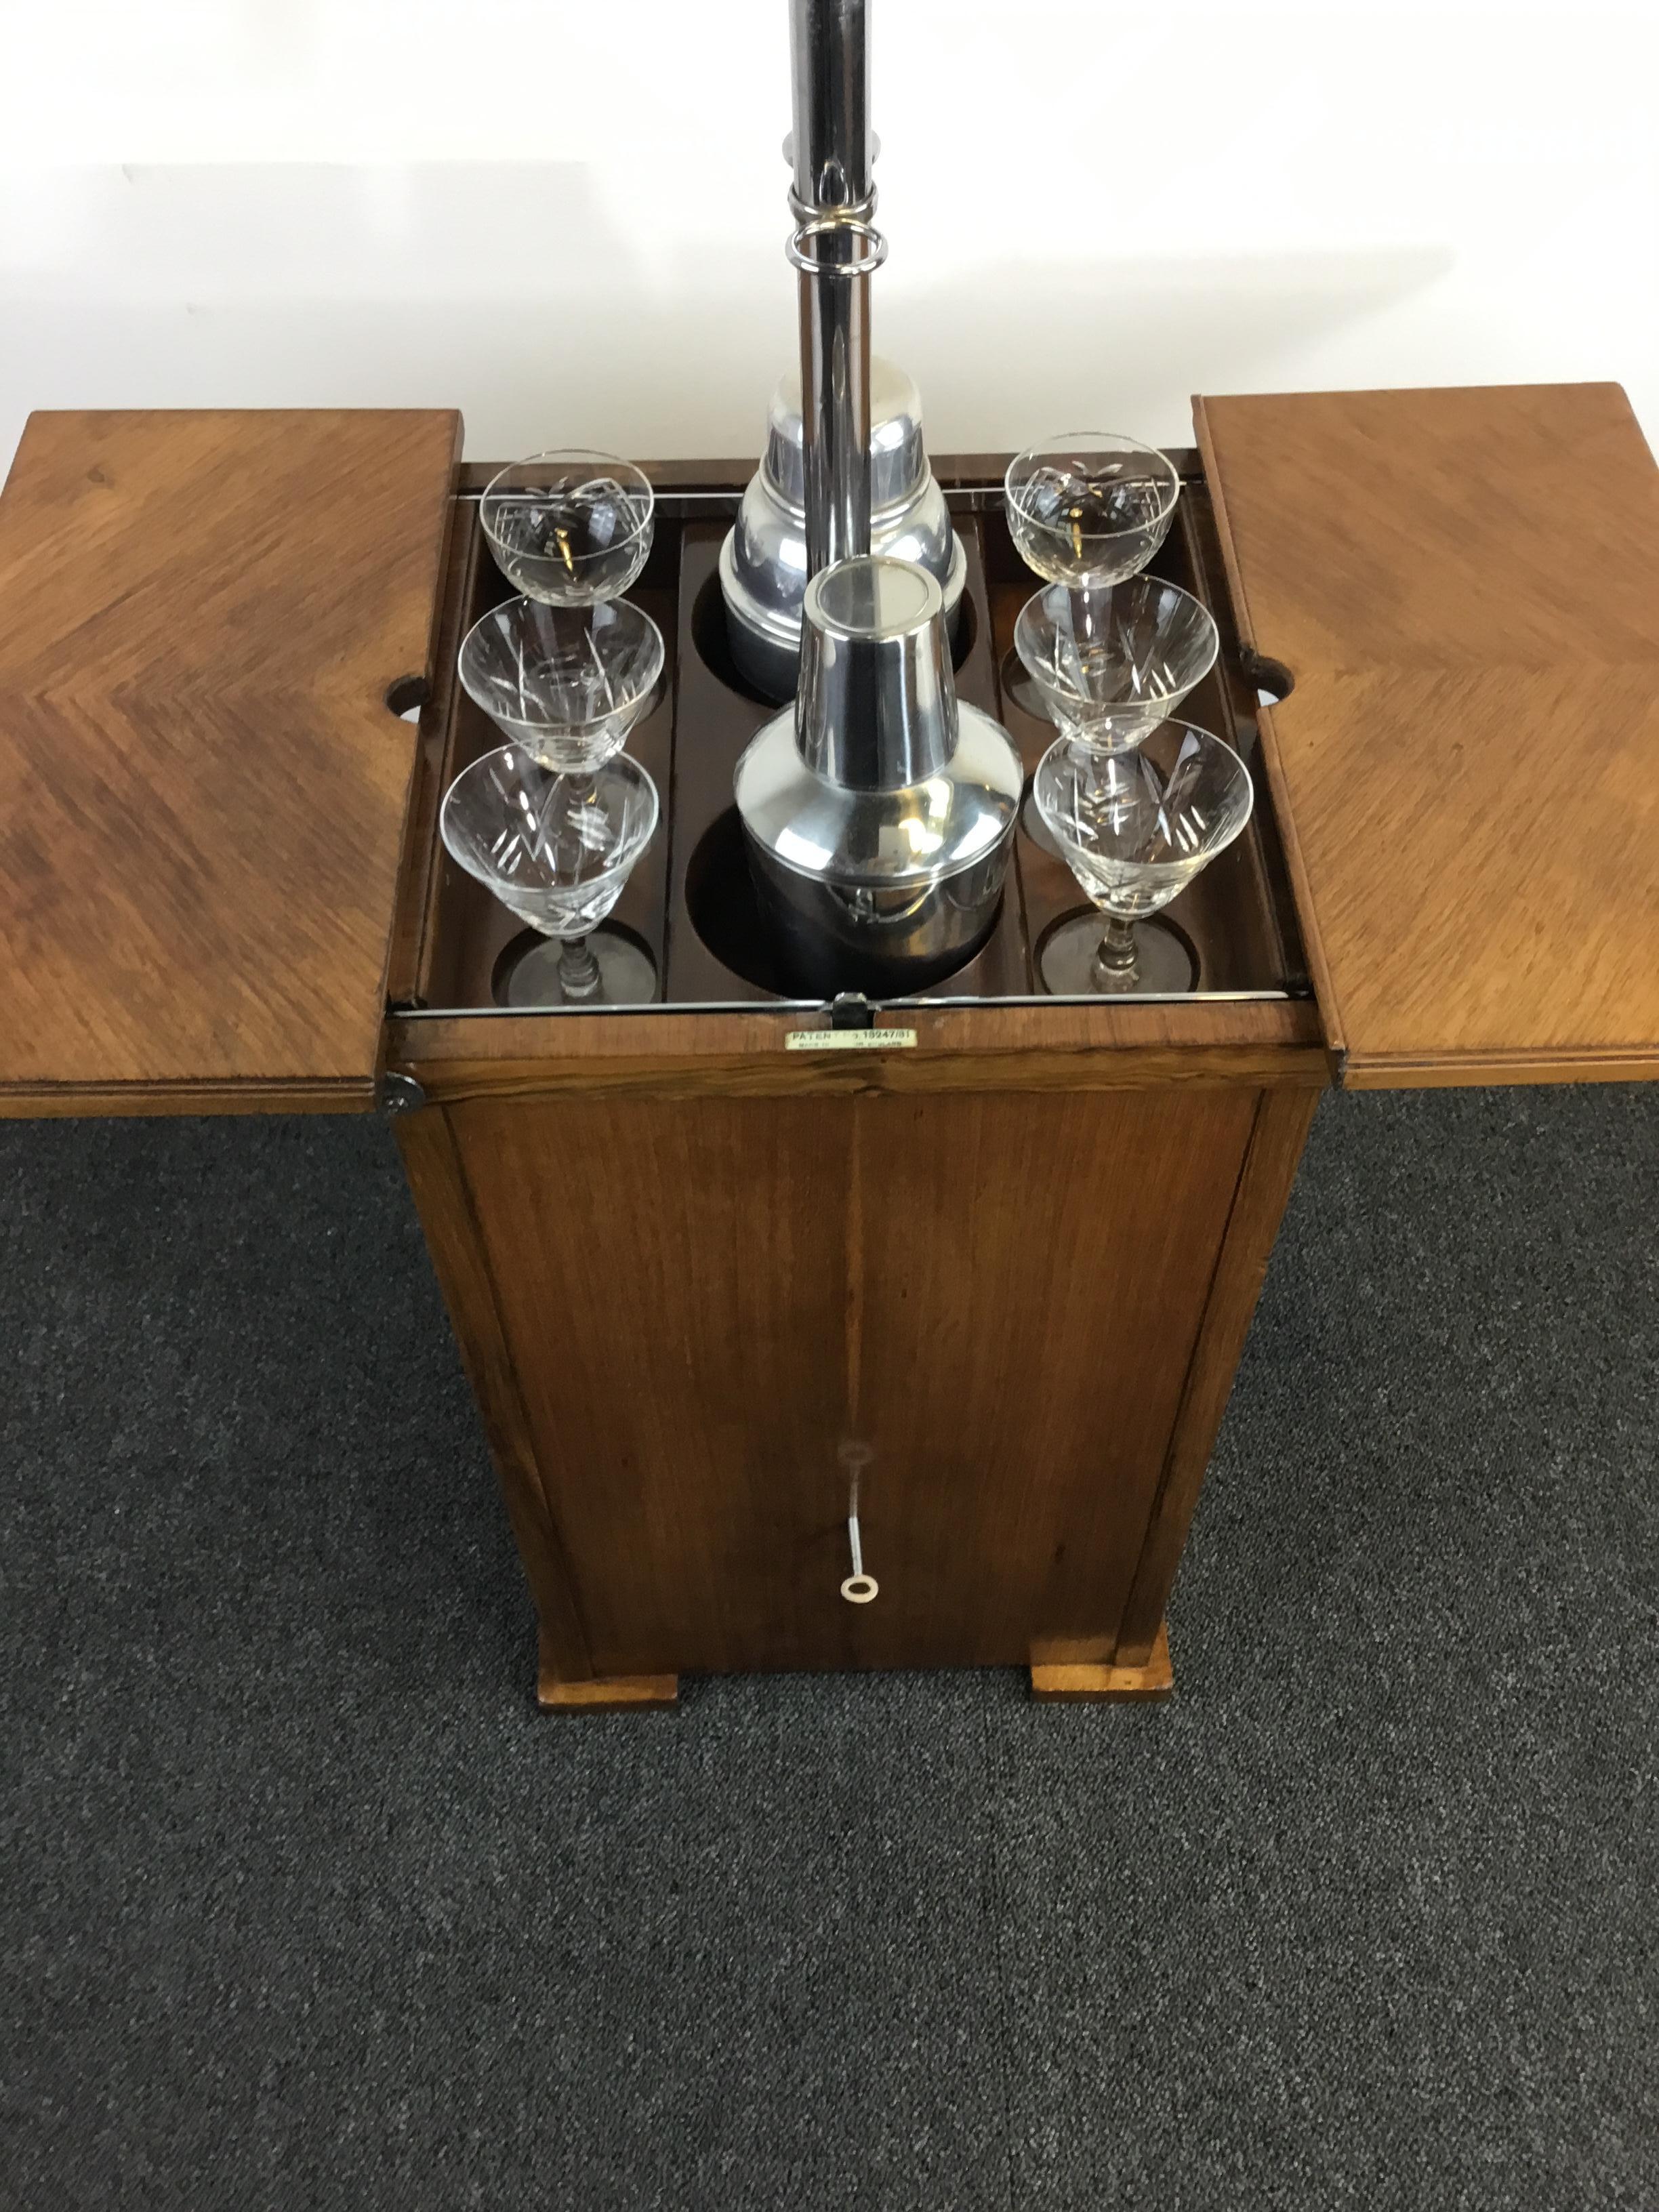 An Art Deco walnut ‘Elevette’ drinks cabinet, produced for Asprey London. British, circa 1930.
A very stylish piece of Art Deco furniture. 
A clever mechanism opens the top and lifts up a drink compartment, for six glasses and two bottles. 
It